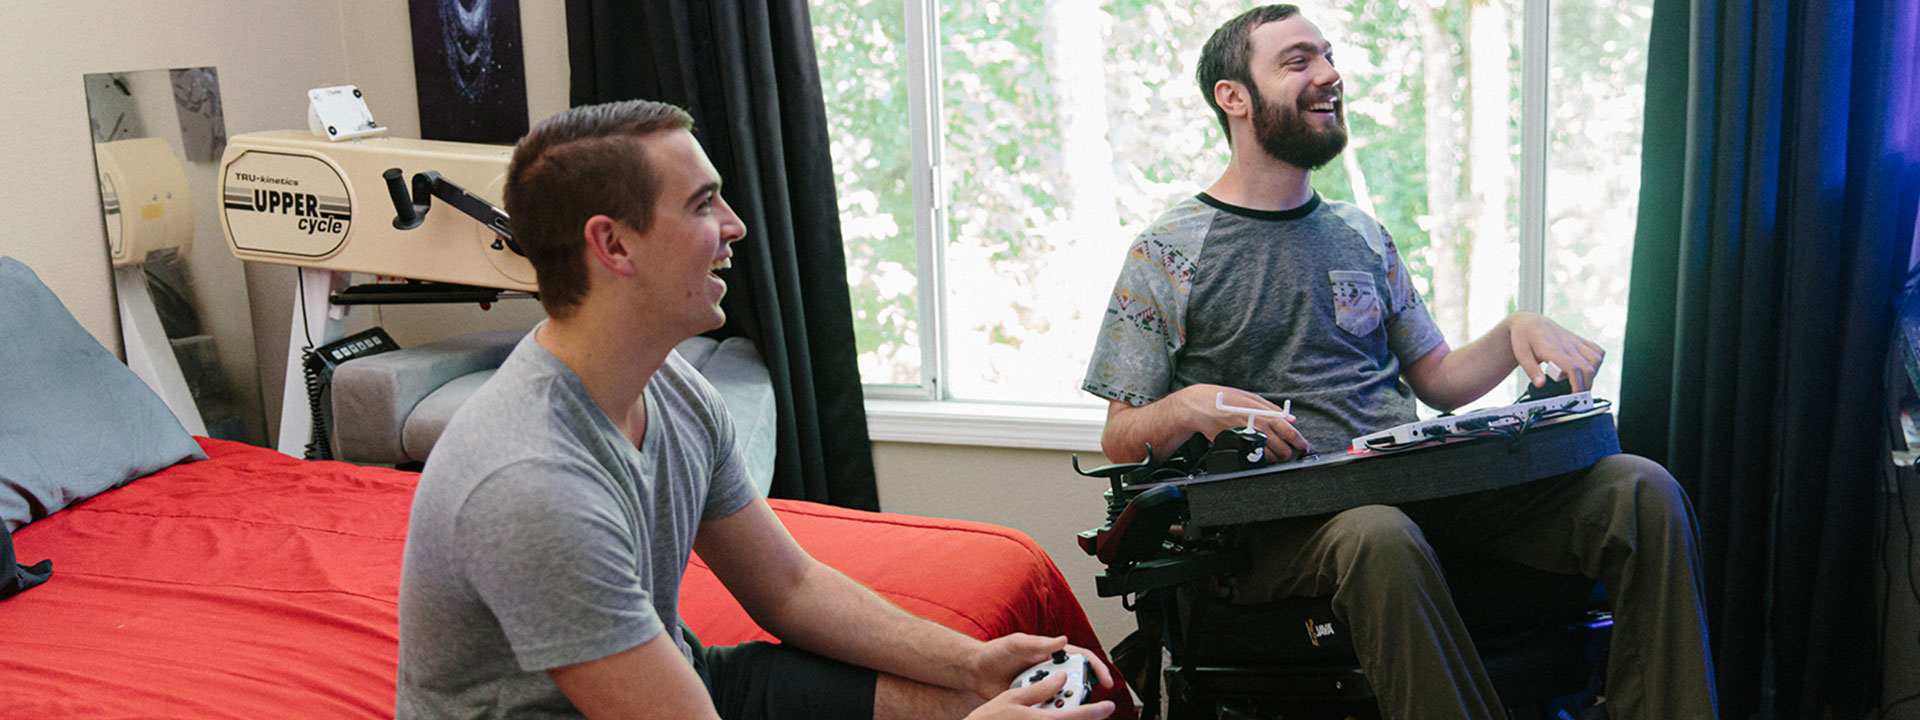 Spencer plays a game using his custom adaptive controller set-up.